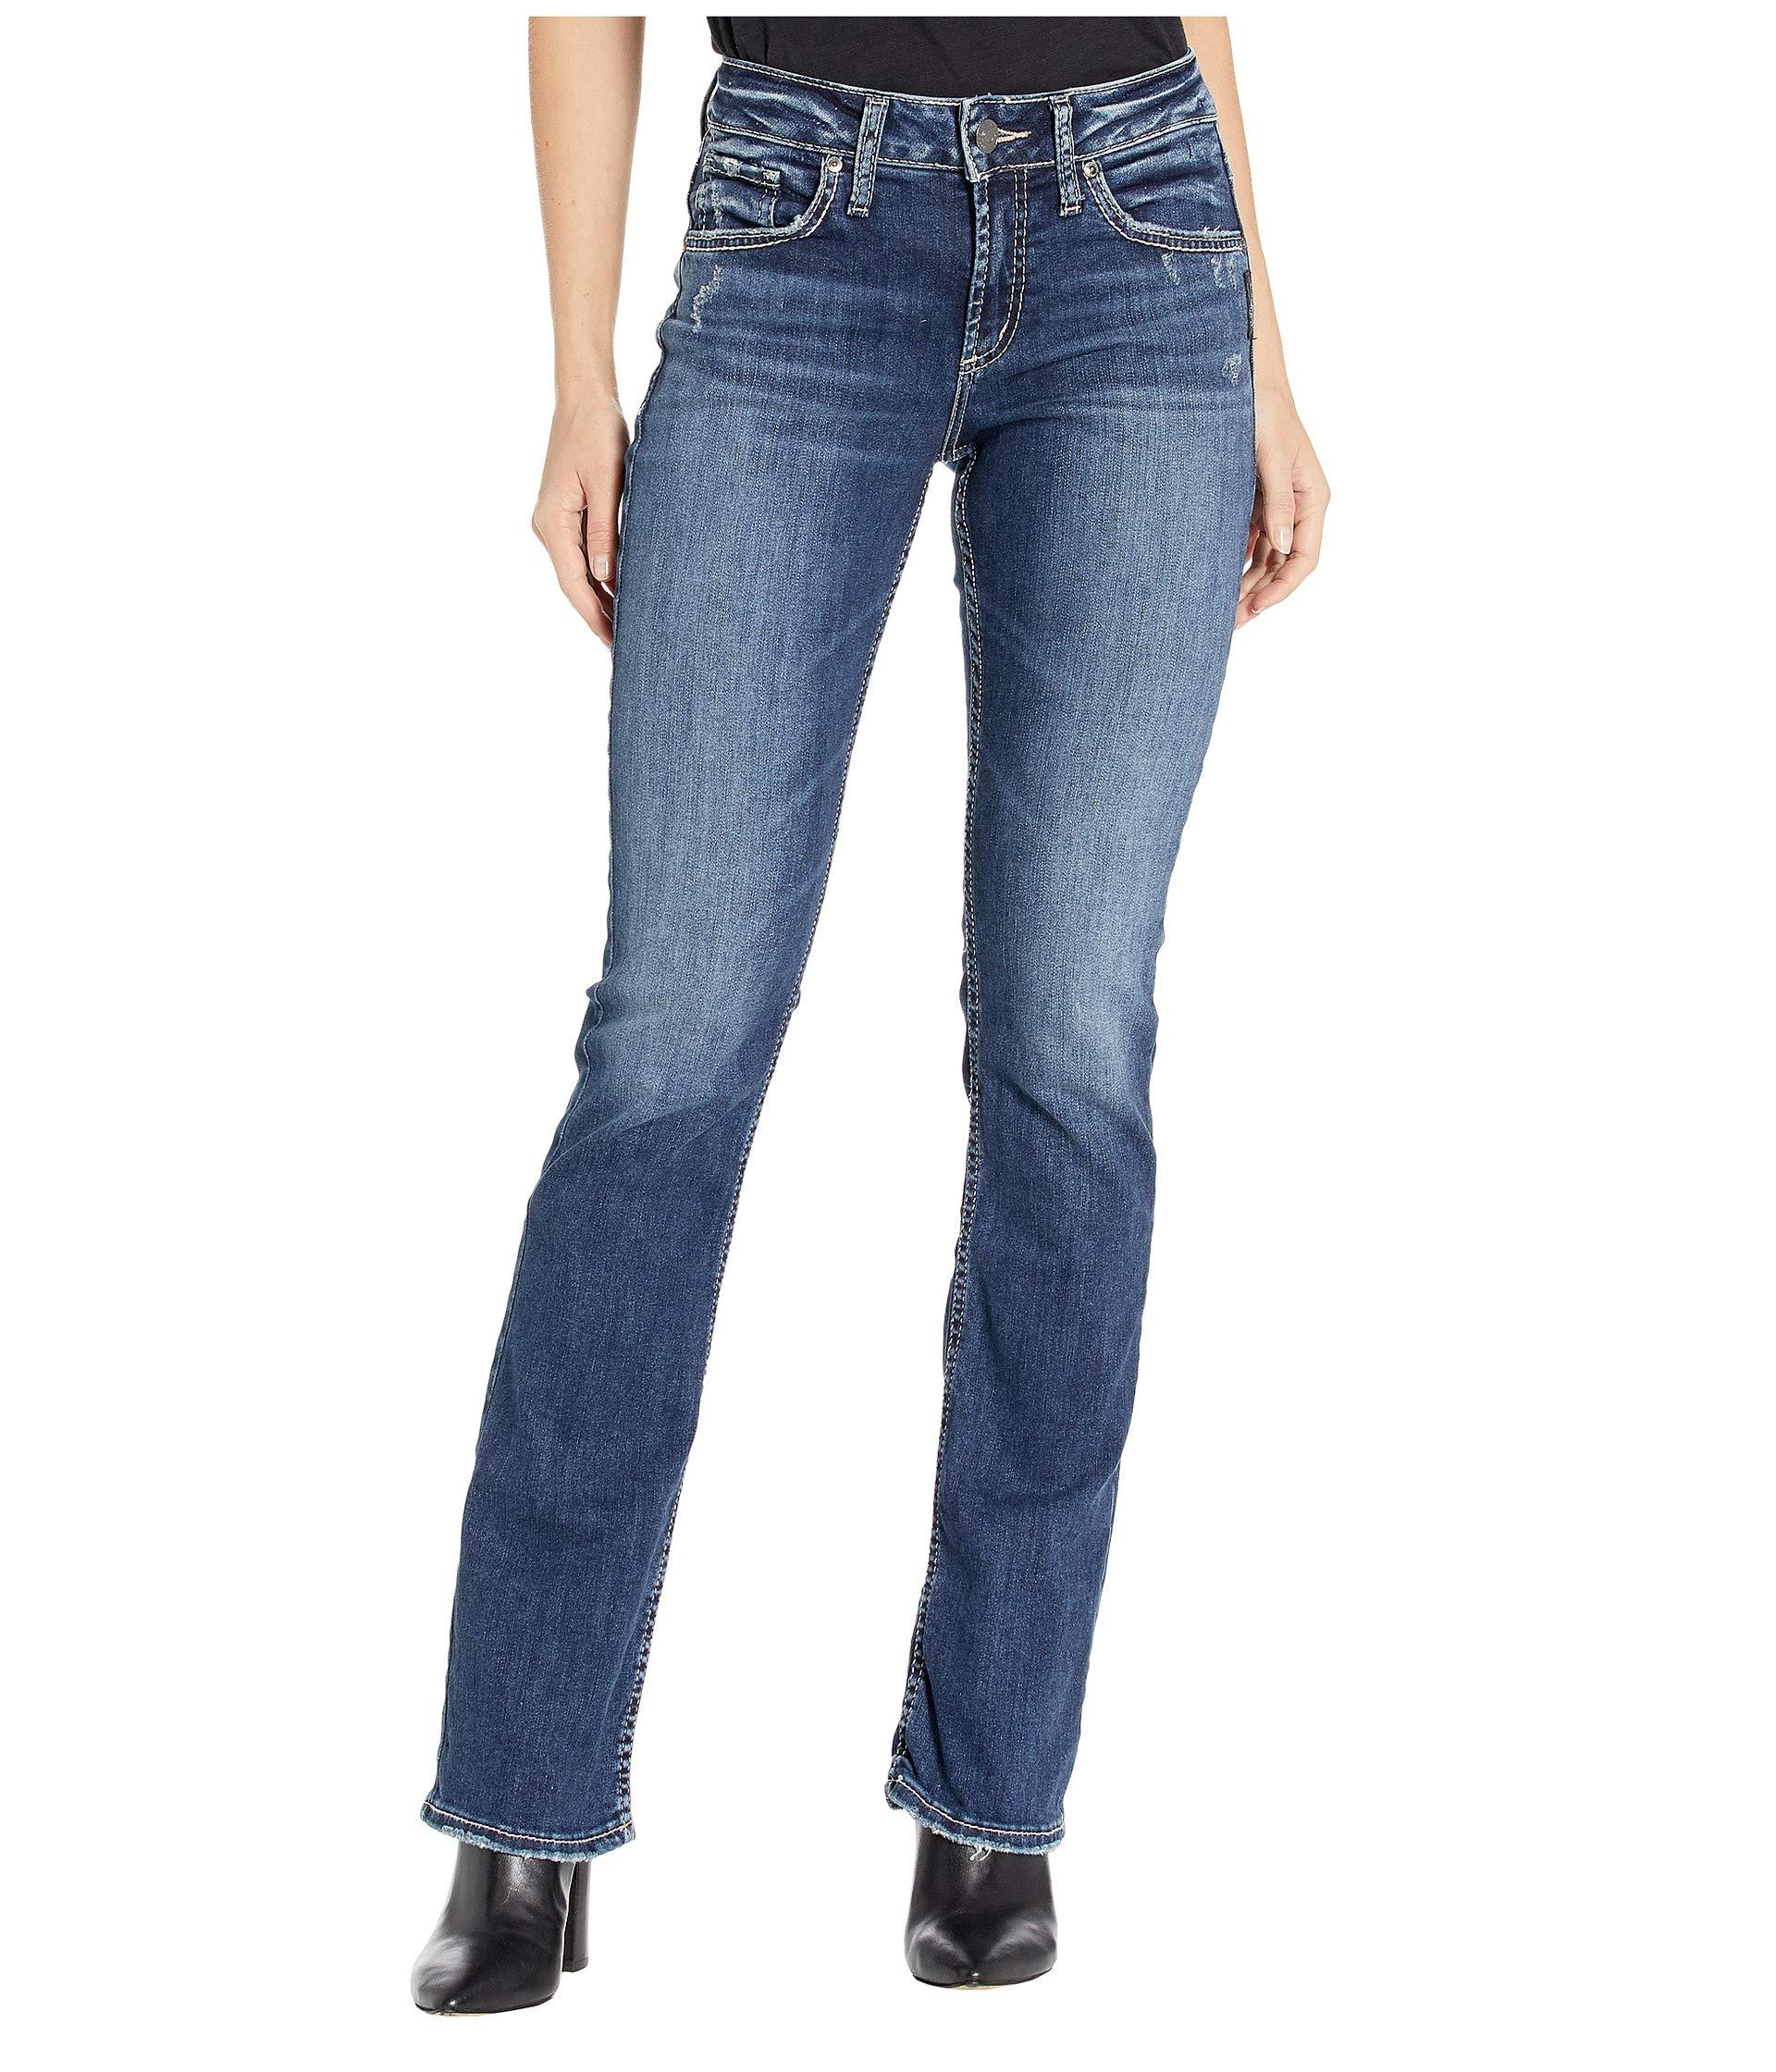 Silver Jeans Co. Denim Avery High-rise Curvy Fit Slim Bootcut 